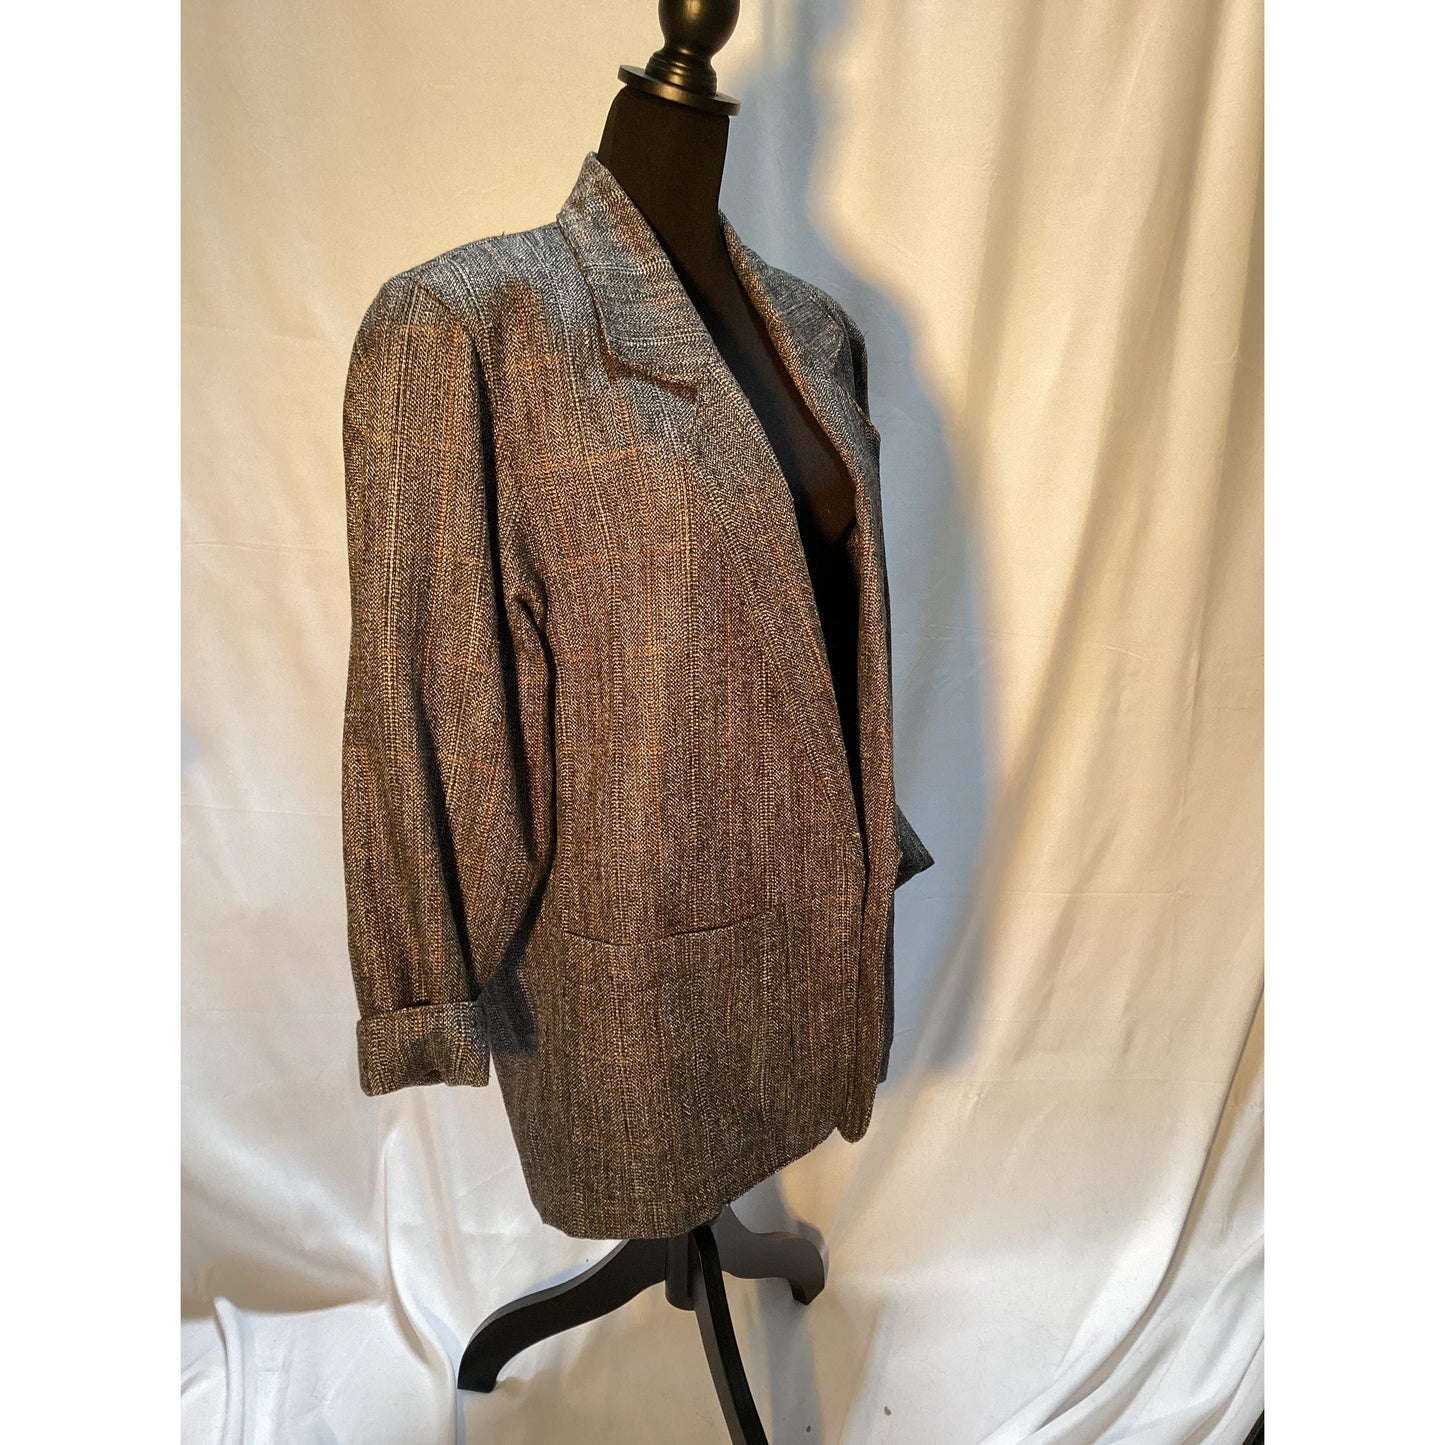 Oversized Beautiful Wool Tweed Jacket with Shoulder Pads size large